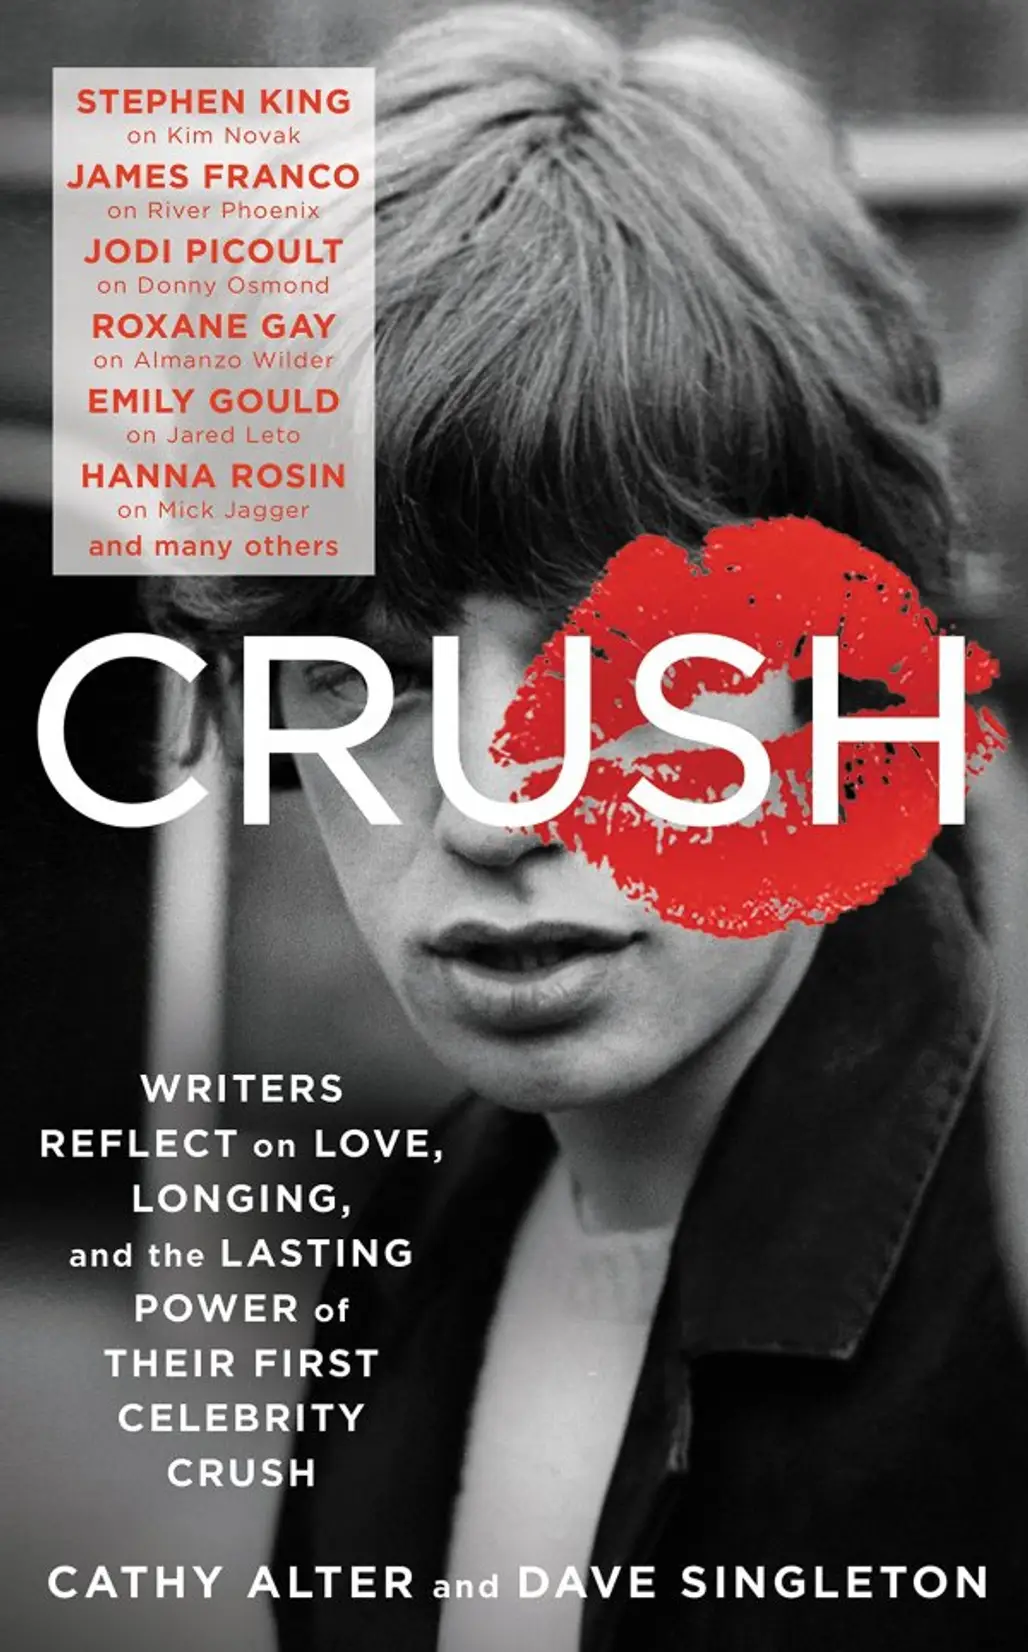 Crush: Writers Reflect on Love, Longing, and the Power of Their First Celebrity Crush by Cathy Alter and Dave Singleton